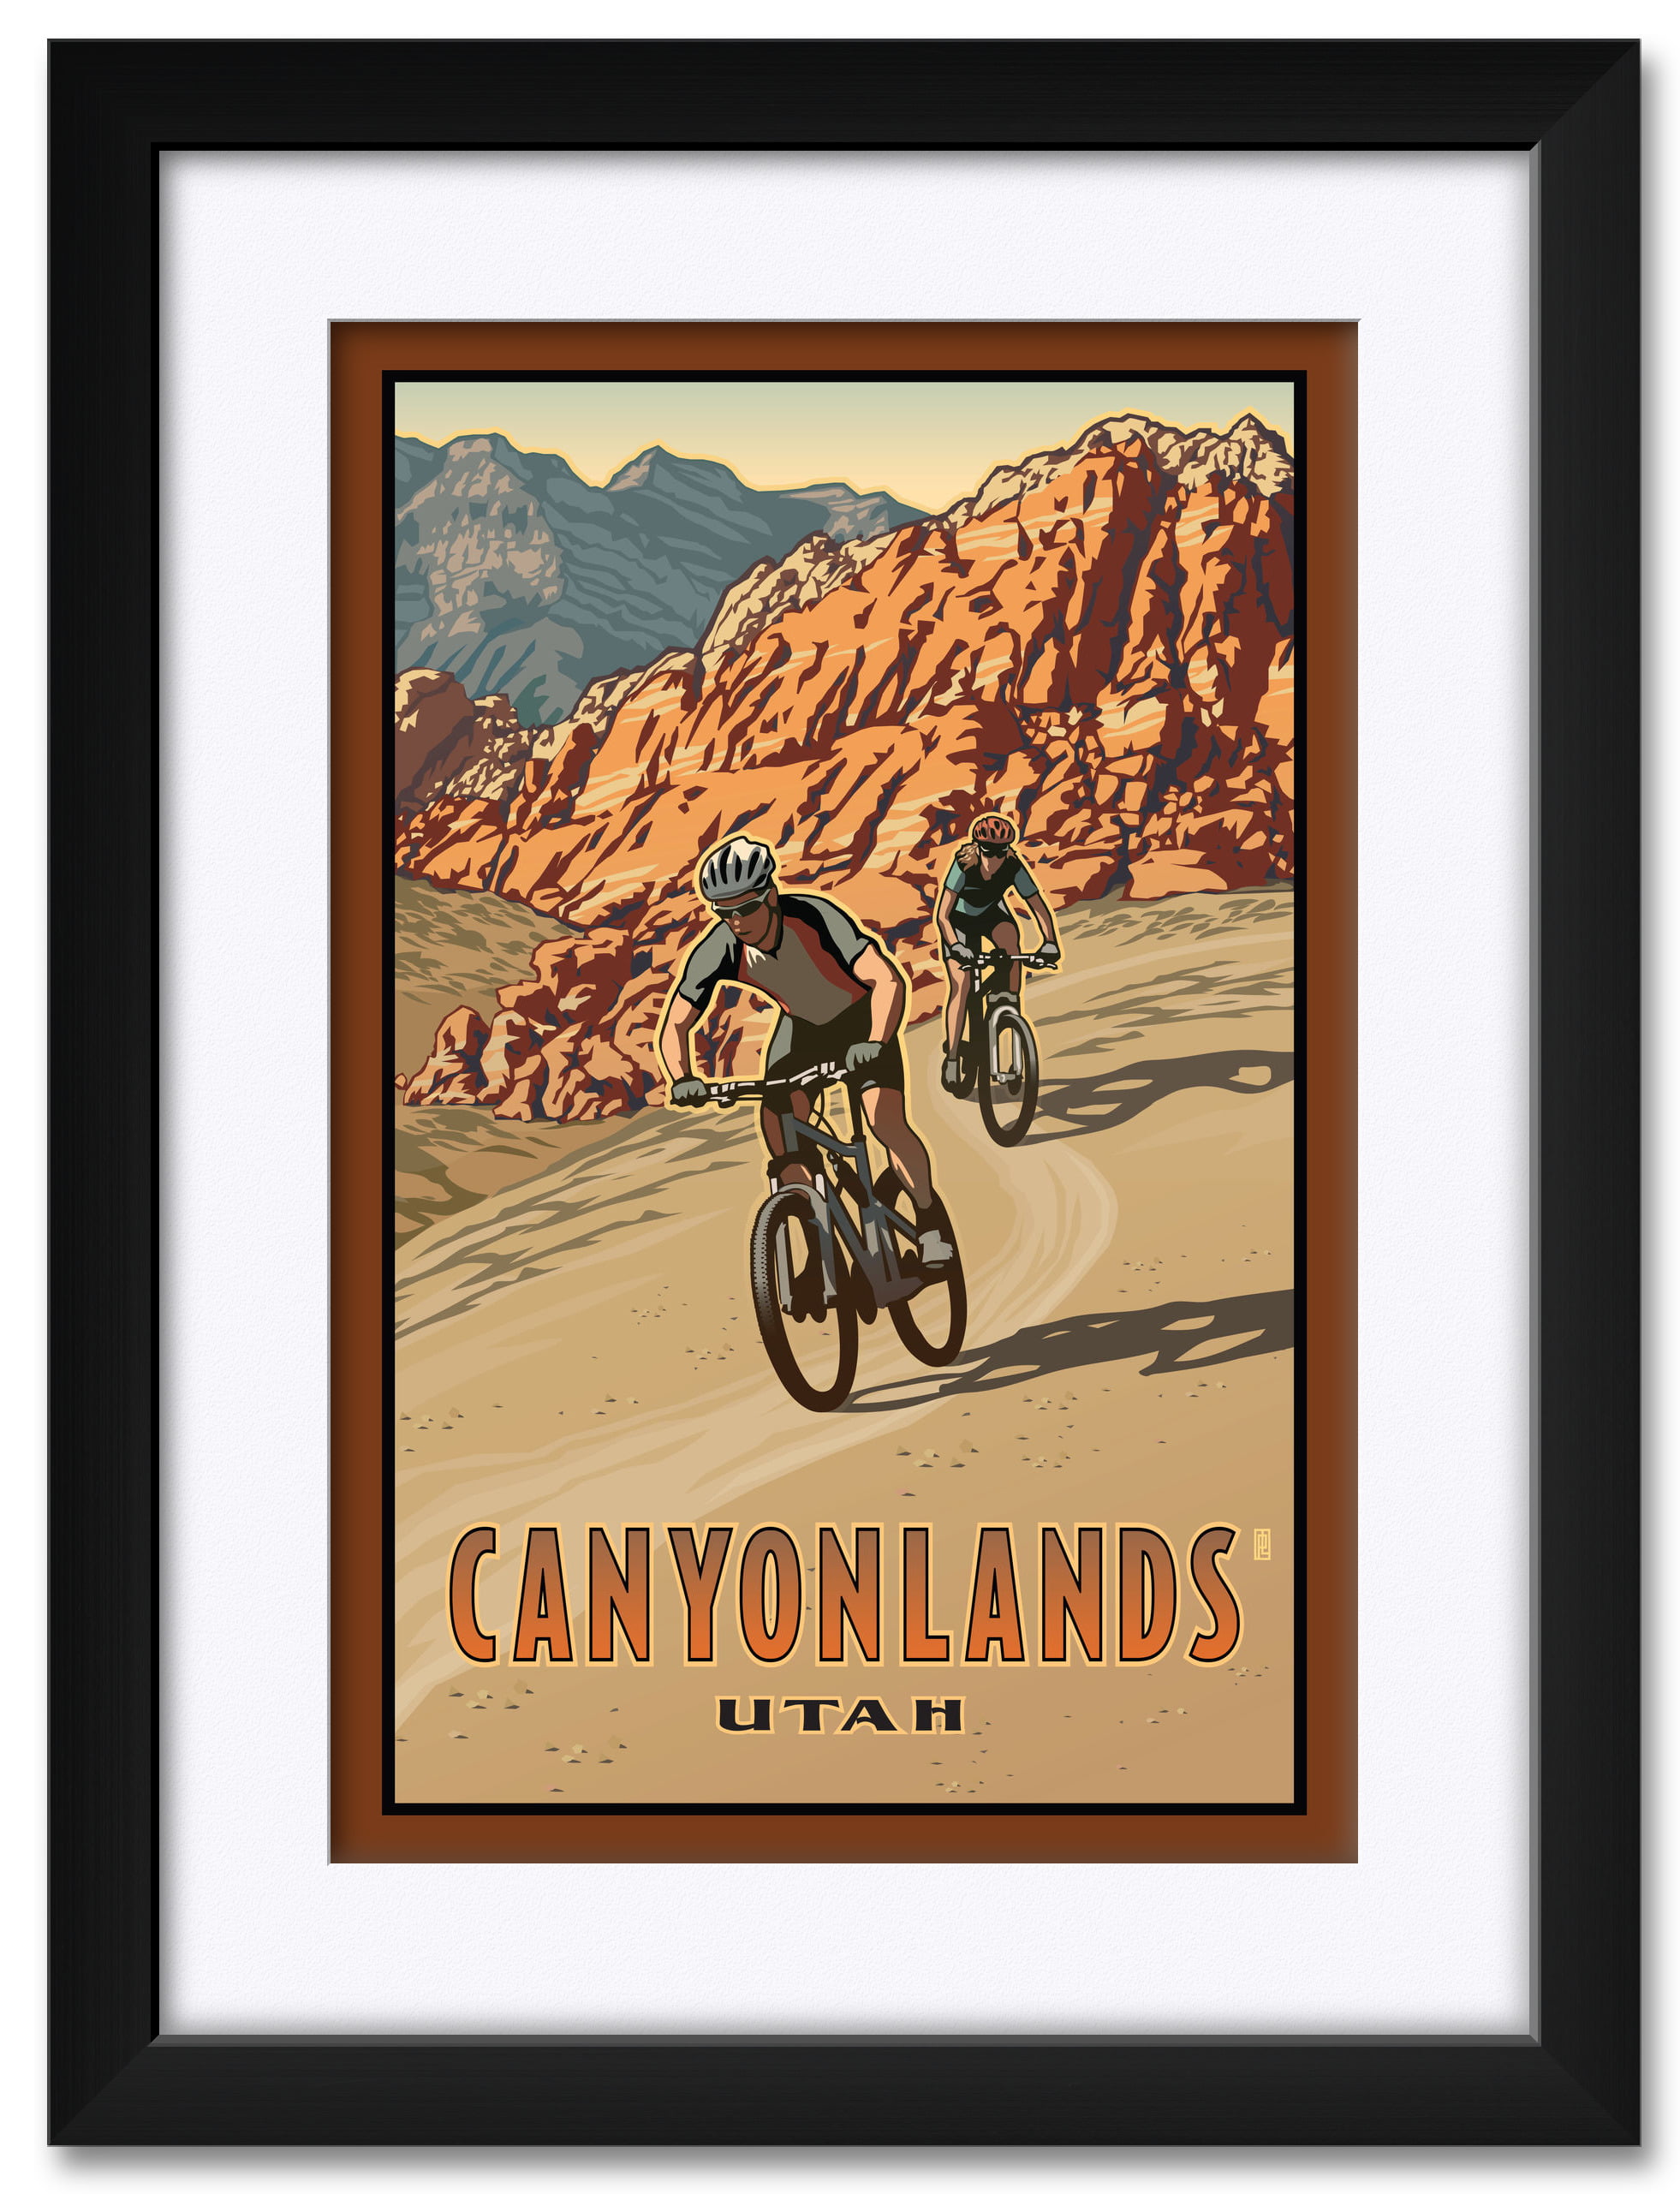 Canyonlands Utah Bikers Framed & Matted Art Print by Paul Leighton. Print Size 12" x 18" Framed